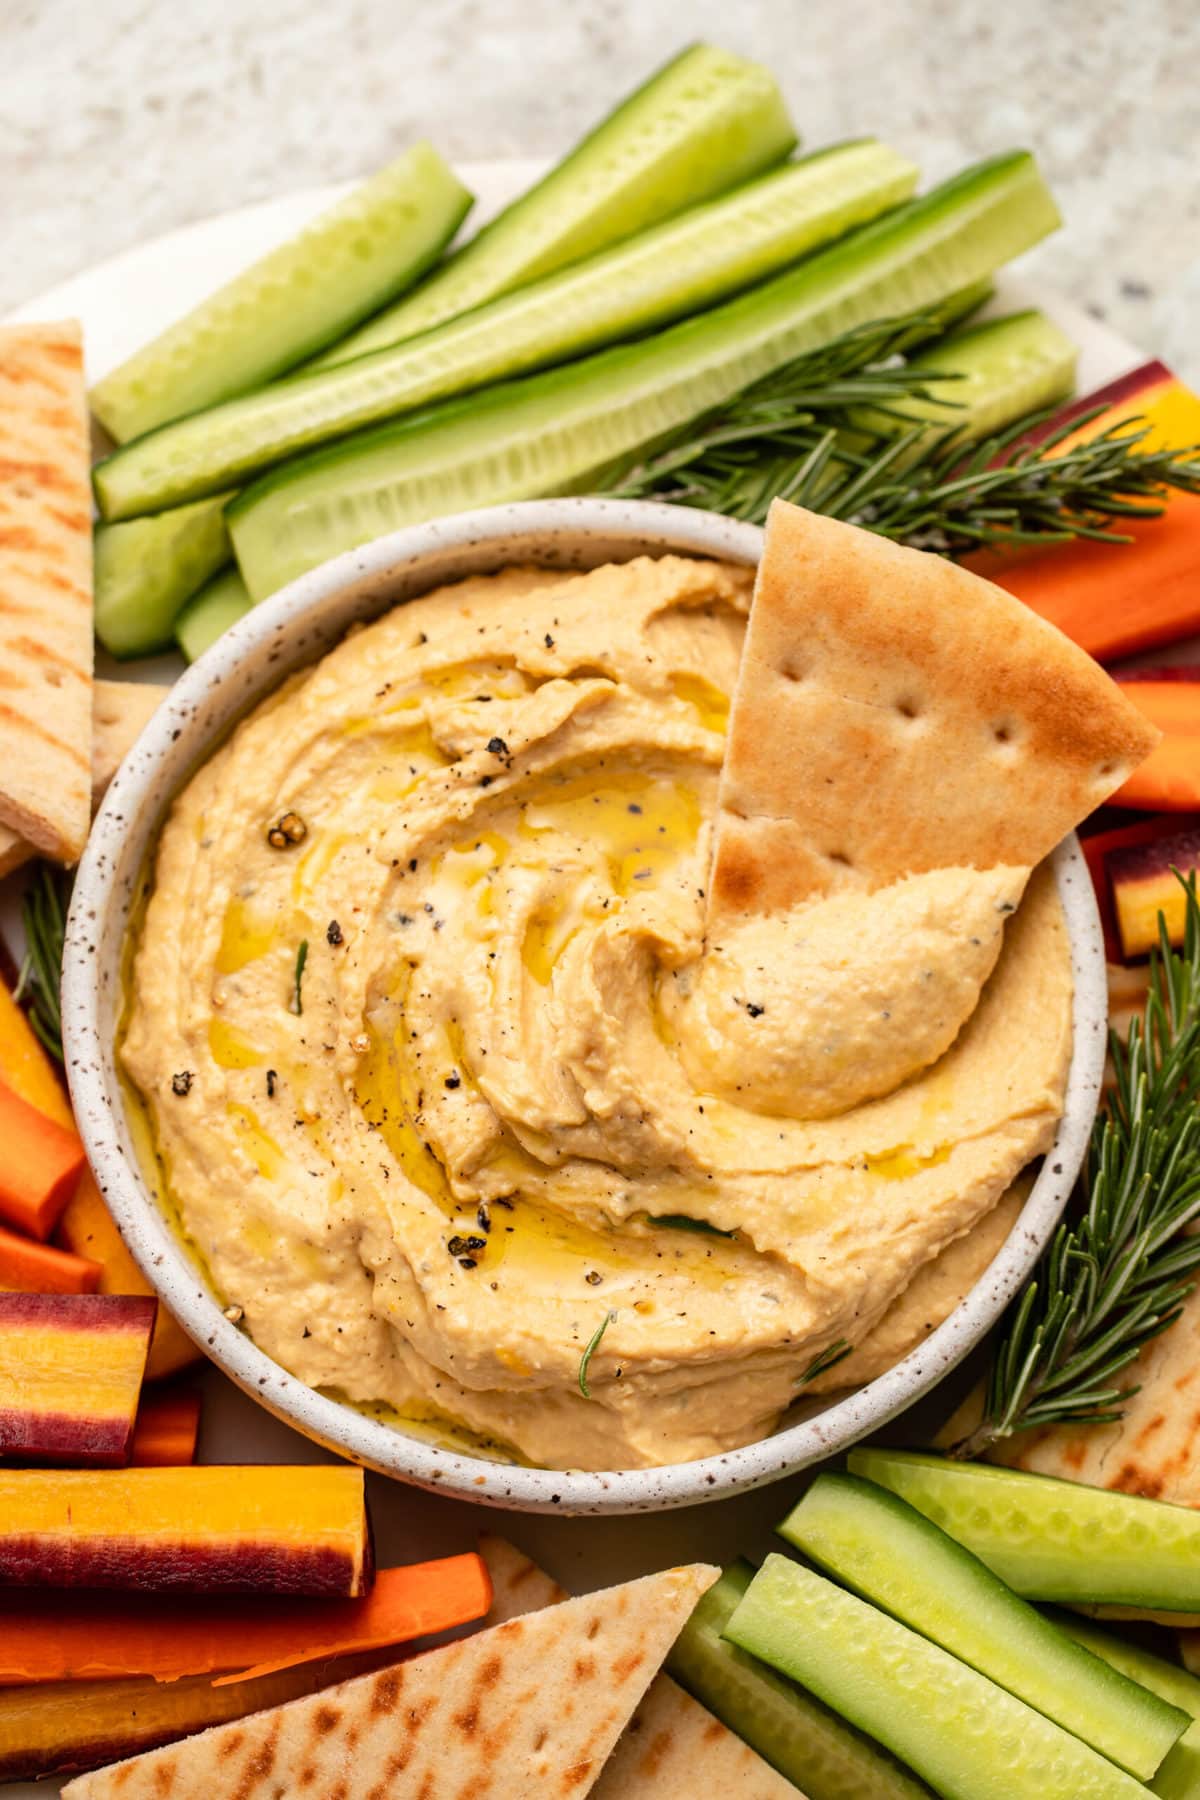 Butternut squash hummus on vegetable tray with slice of pita dipping into hummus